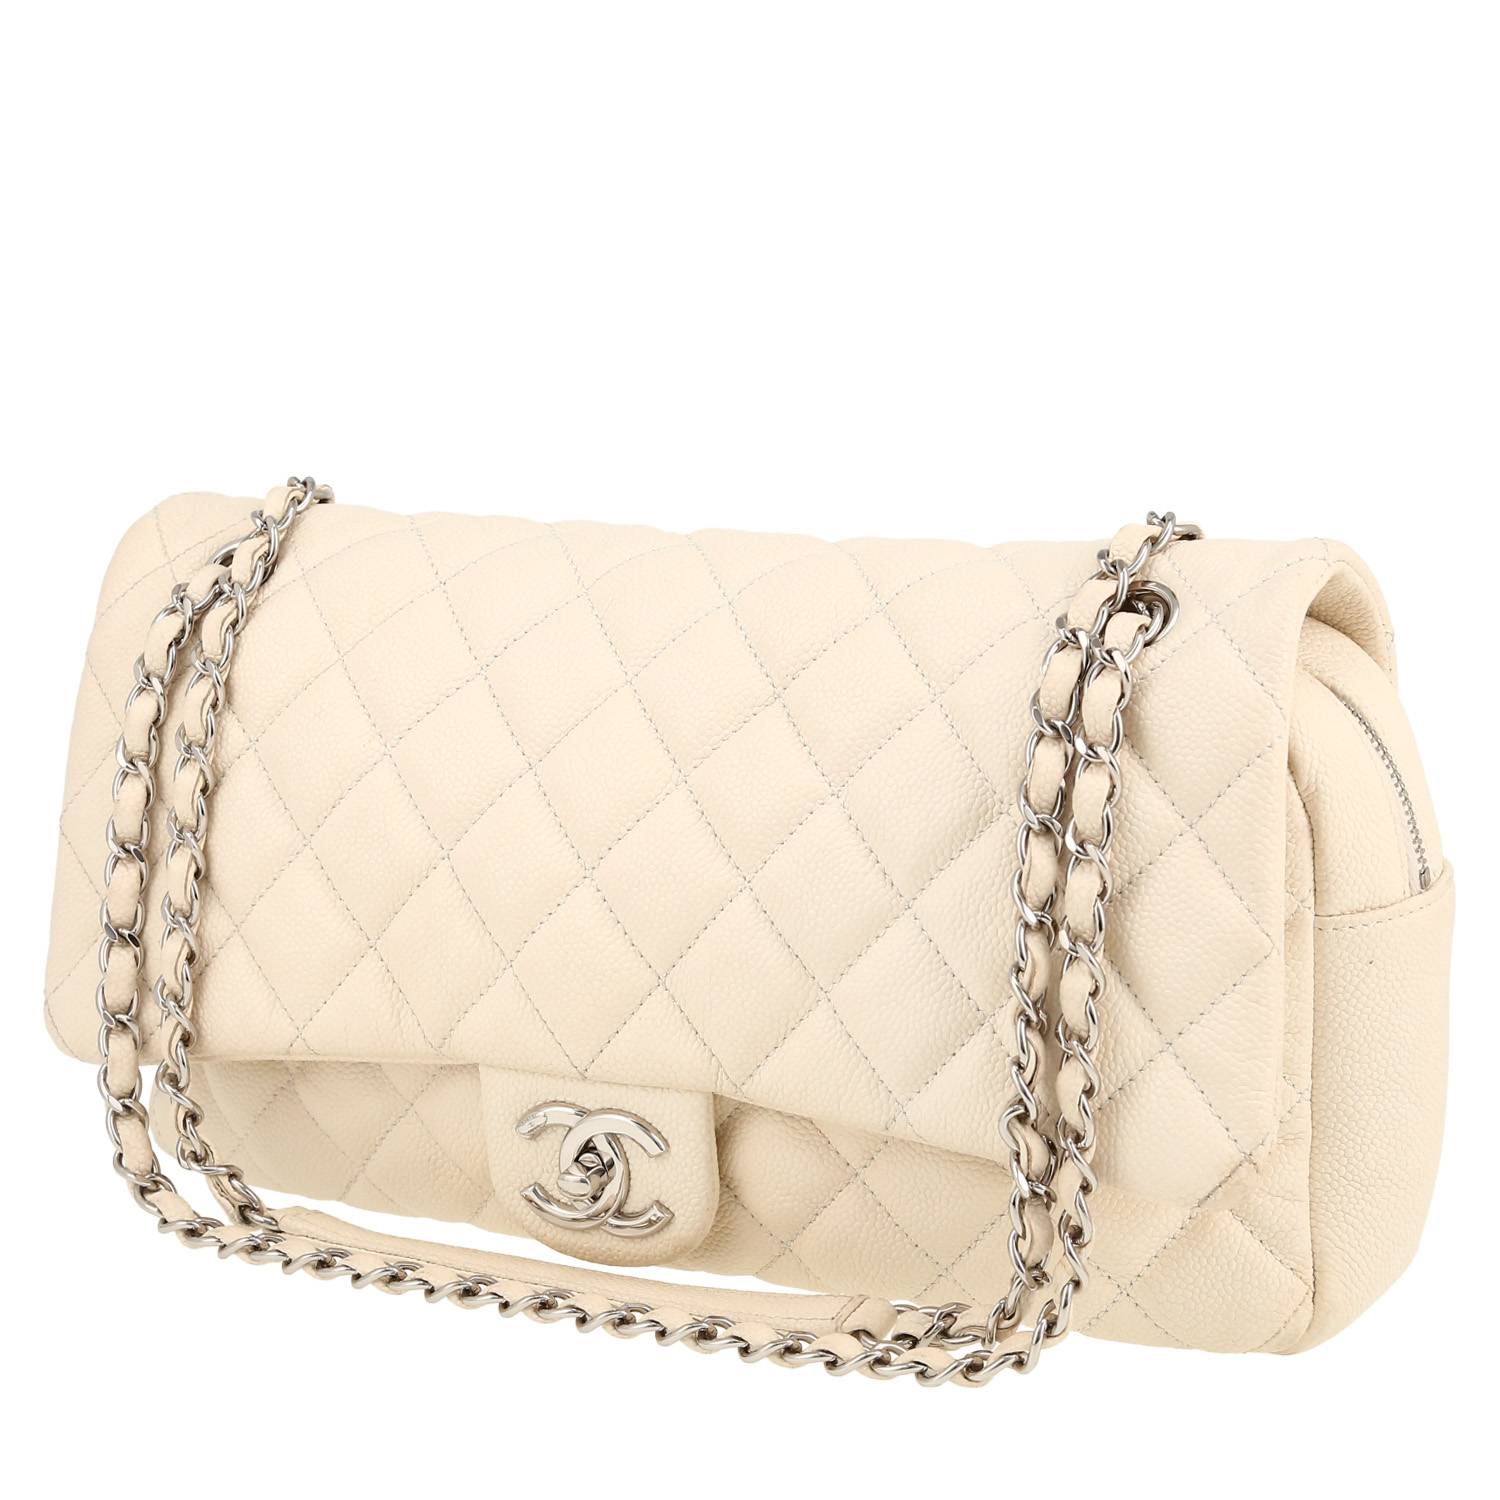 Timeless Jumbo Handbag In Cream Color Quilted Leather